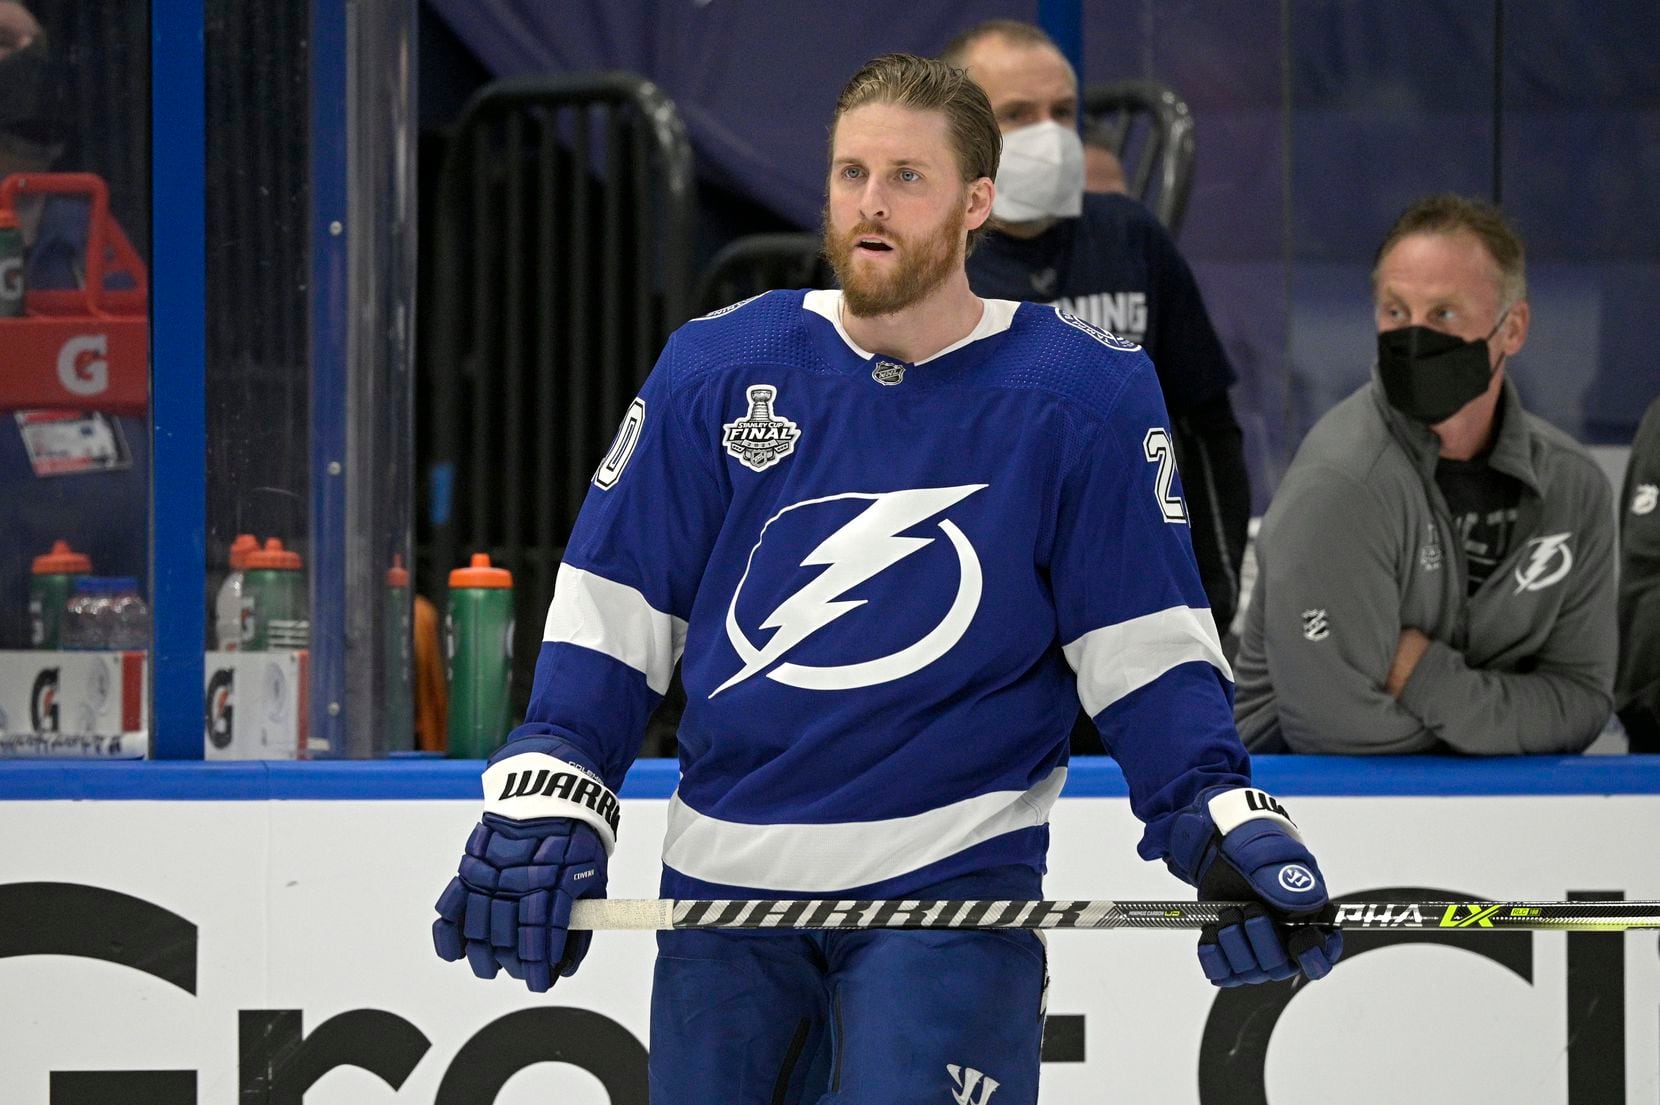 Tampa Bay Lightning center Blake Coleman (20) warms up before Game 1 of the NHL hockey Stanley Cup finals series against the Montreal Canadiens, Monday, June 28, 2021, in Tampa, Fla.